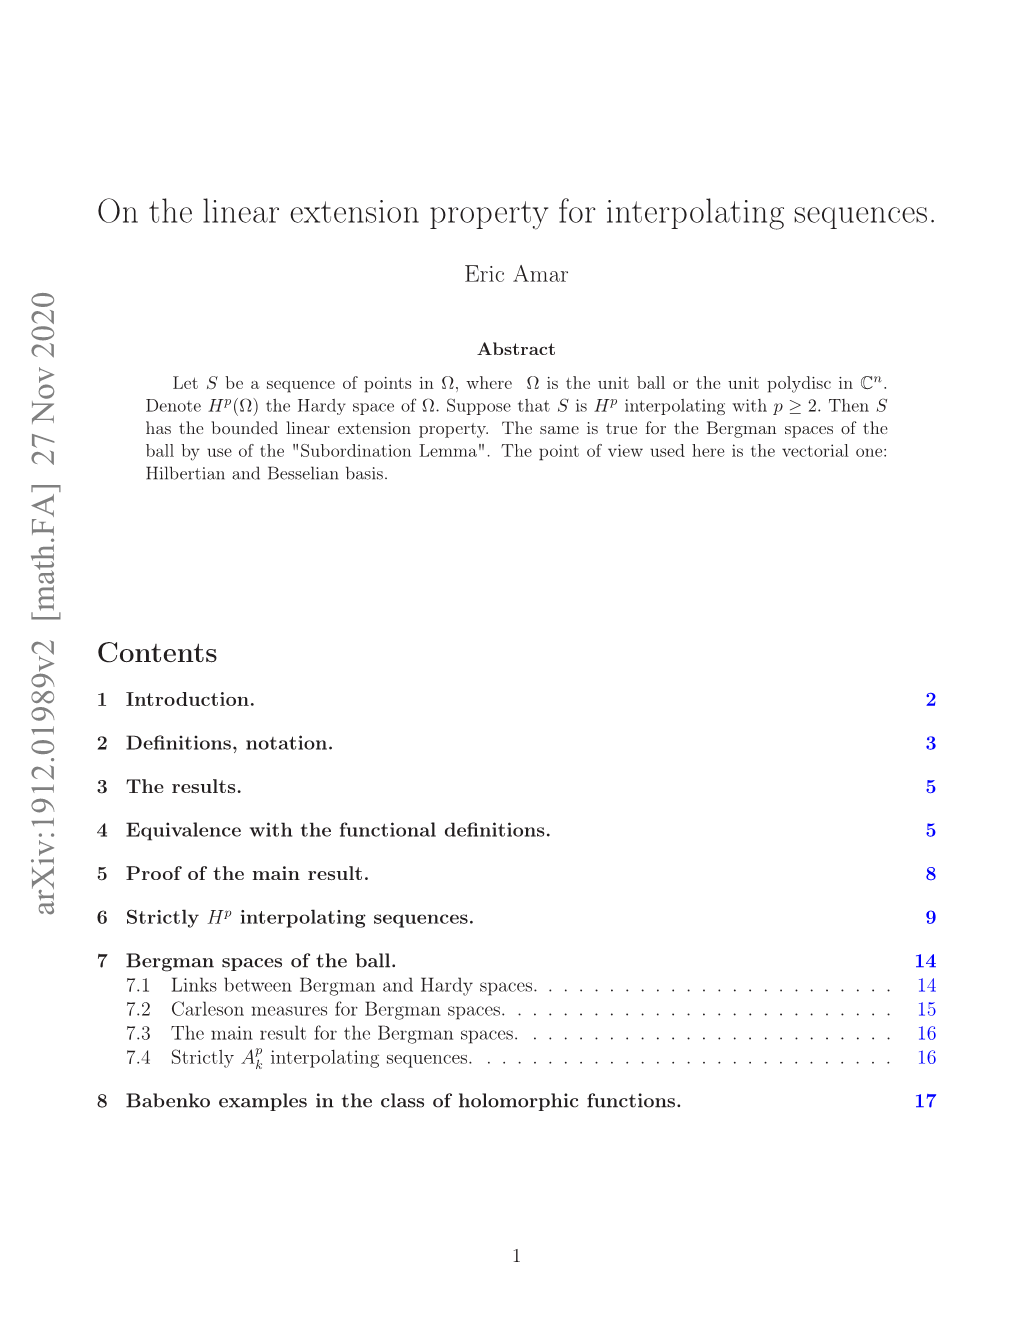 On the Linear Extension Property for Interpolating Sequences